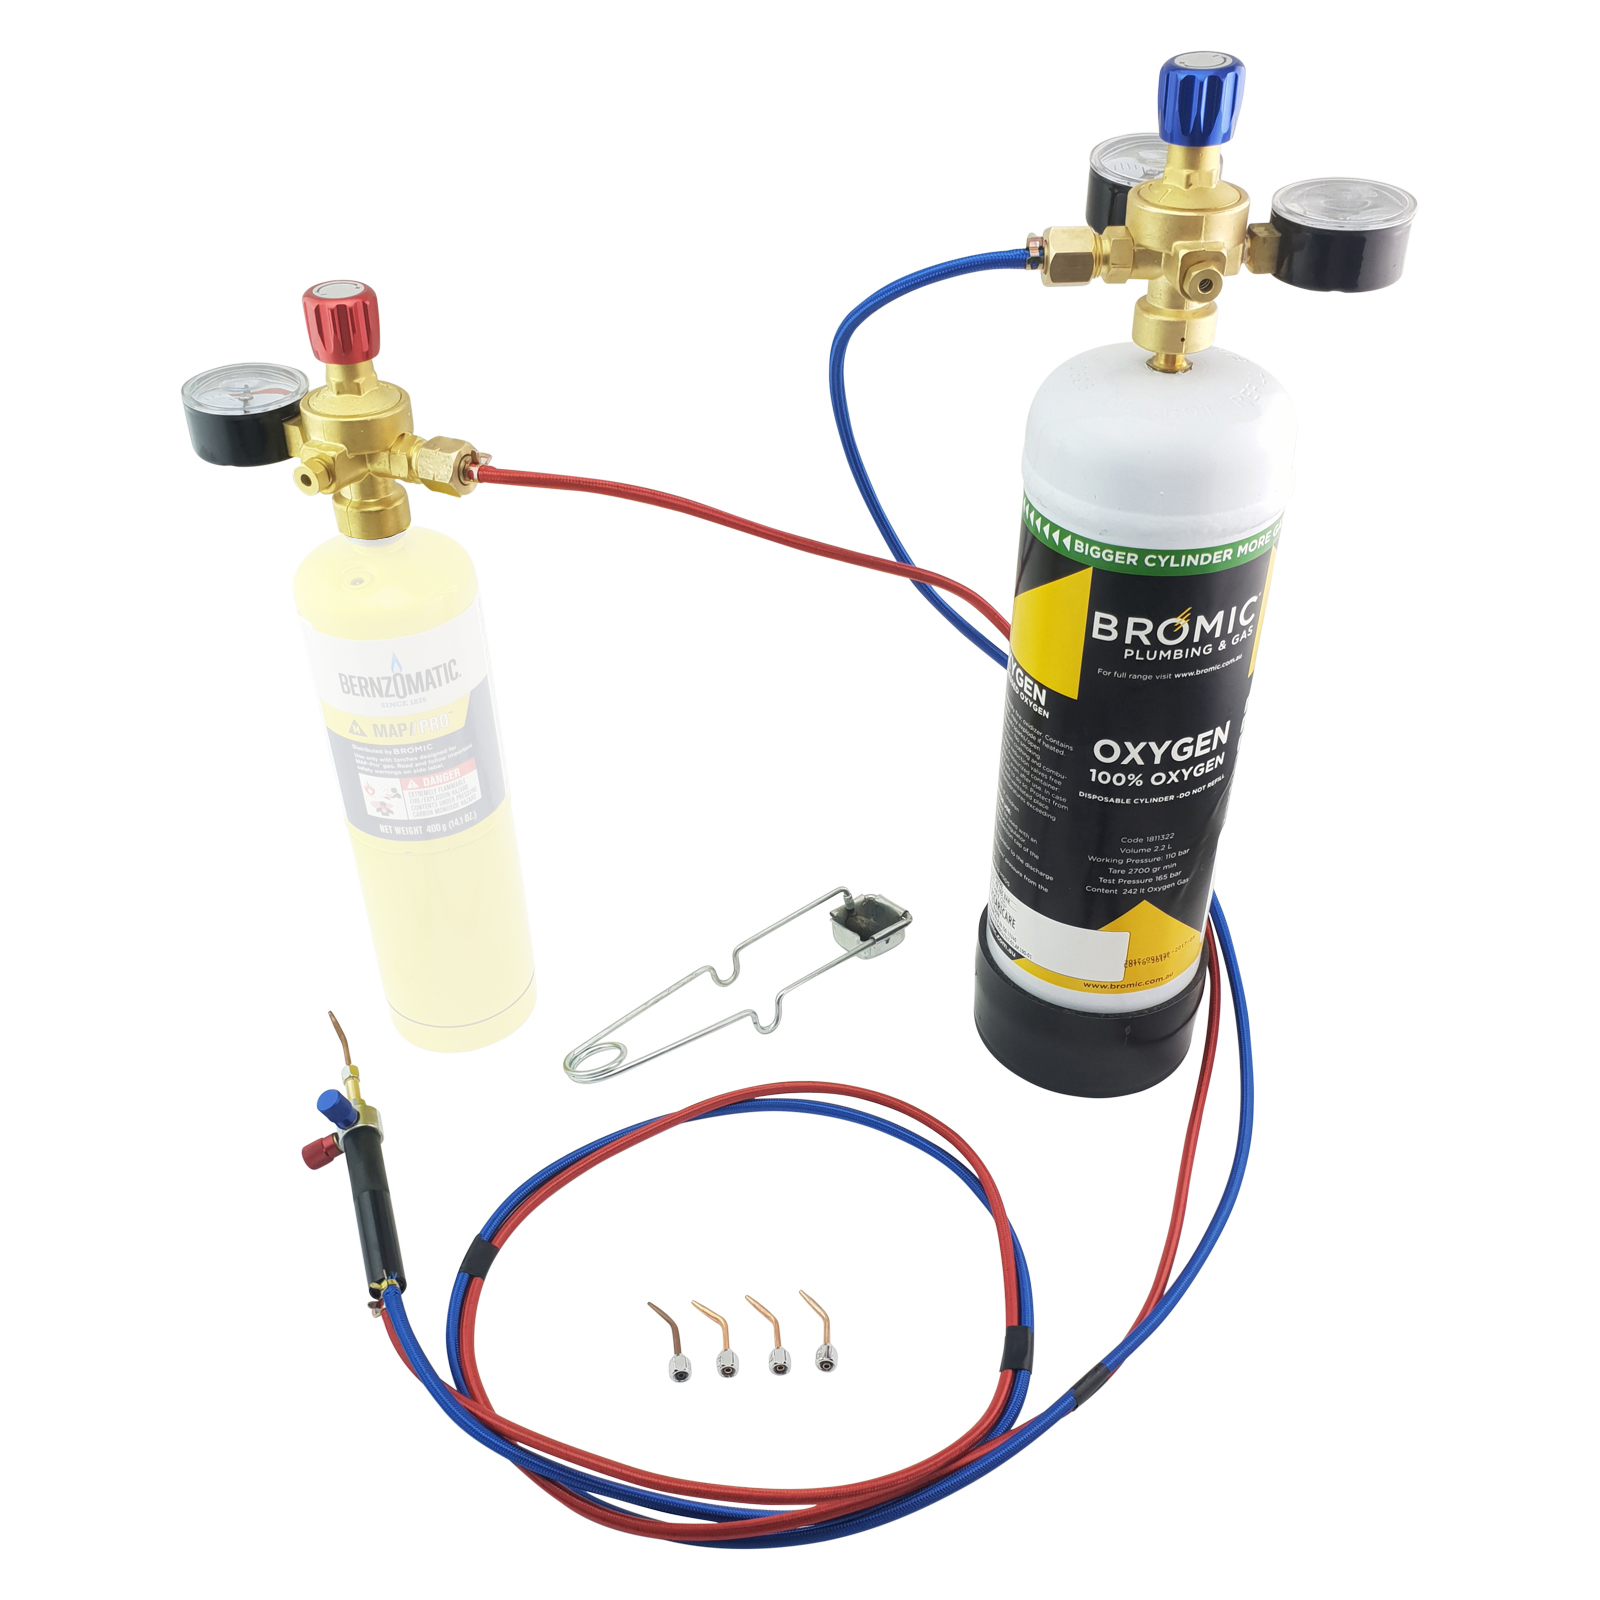 Complete Micro Torch Kit Oxylpg Regulators Lighter And Bottle Jewelers